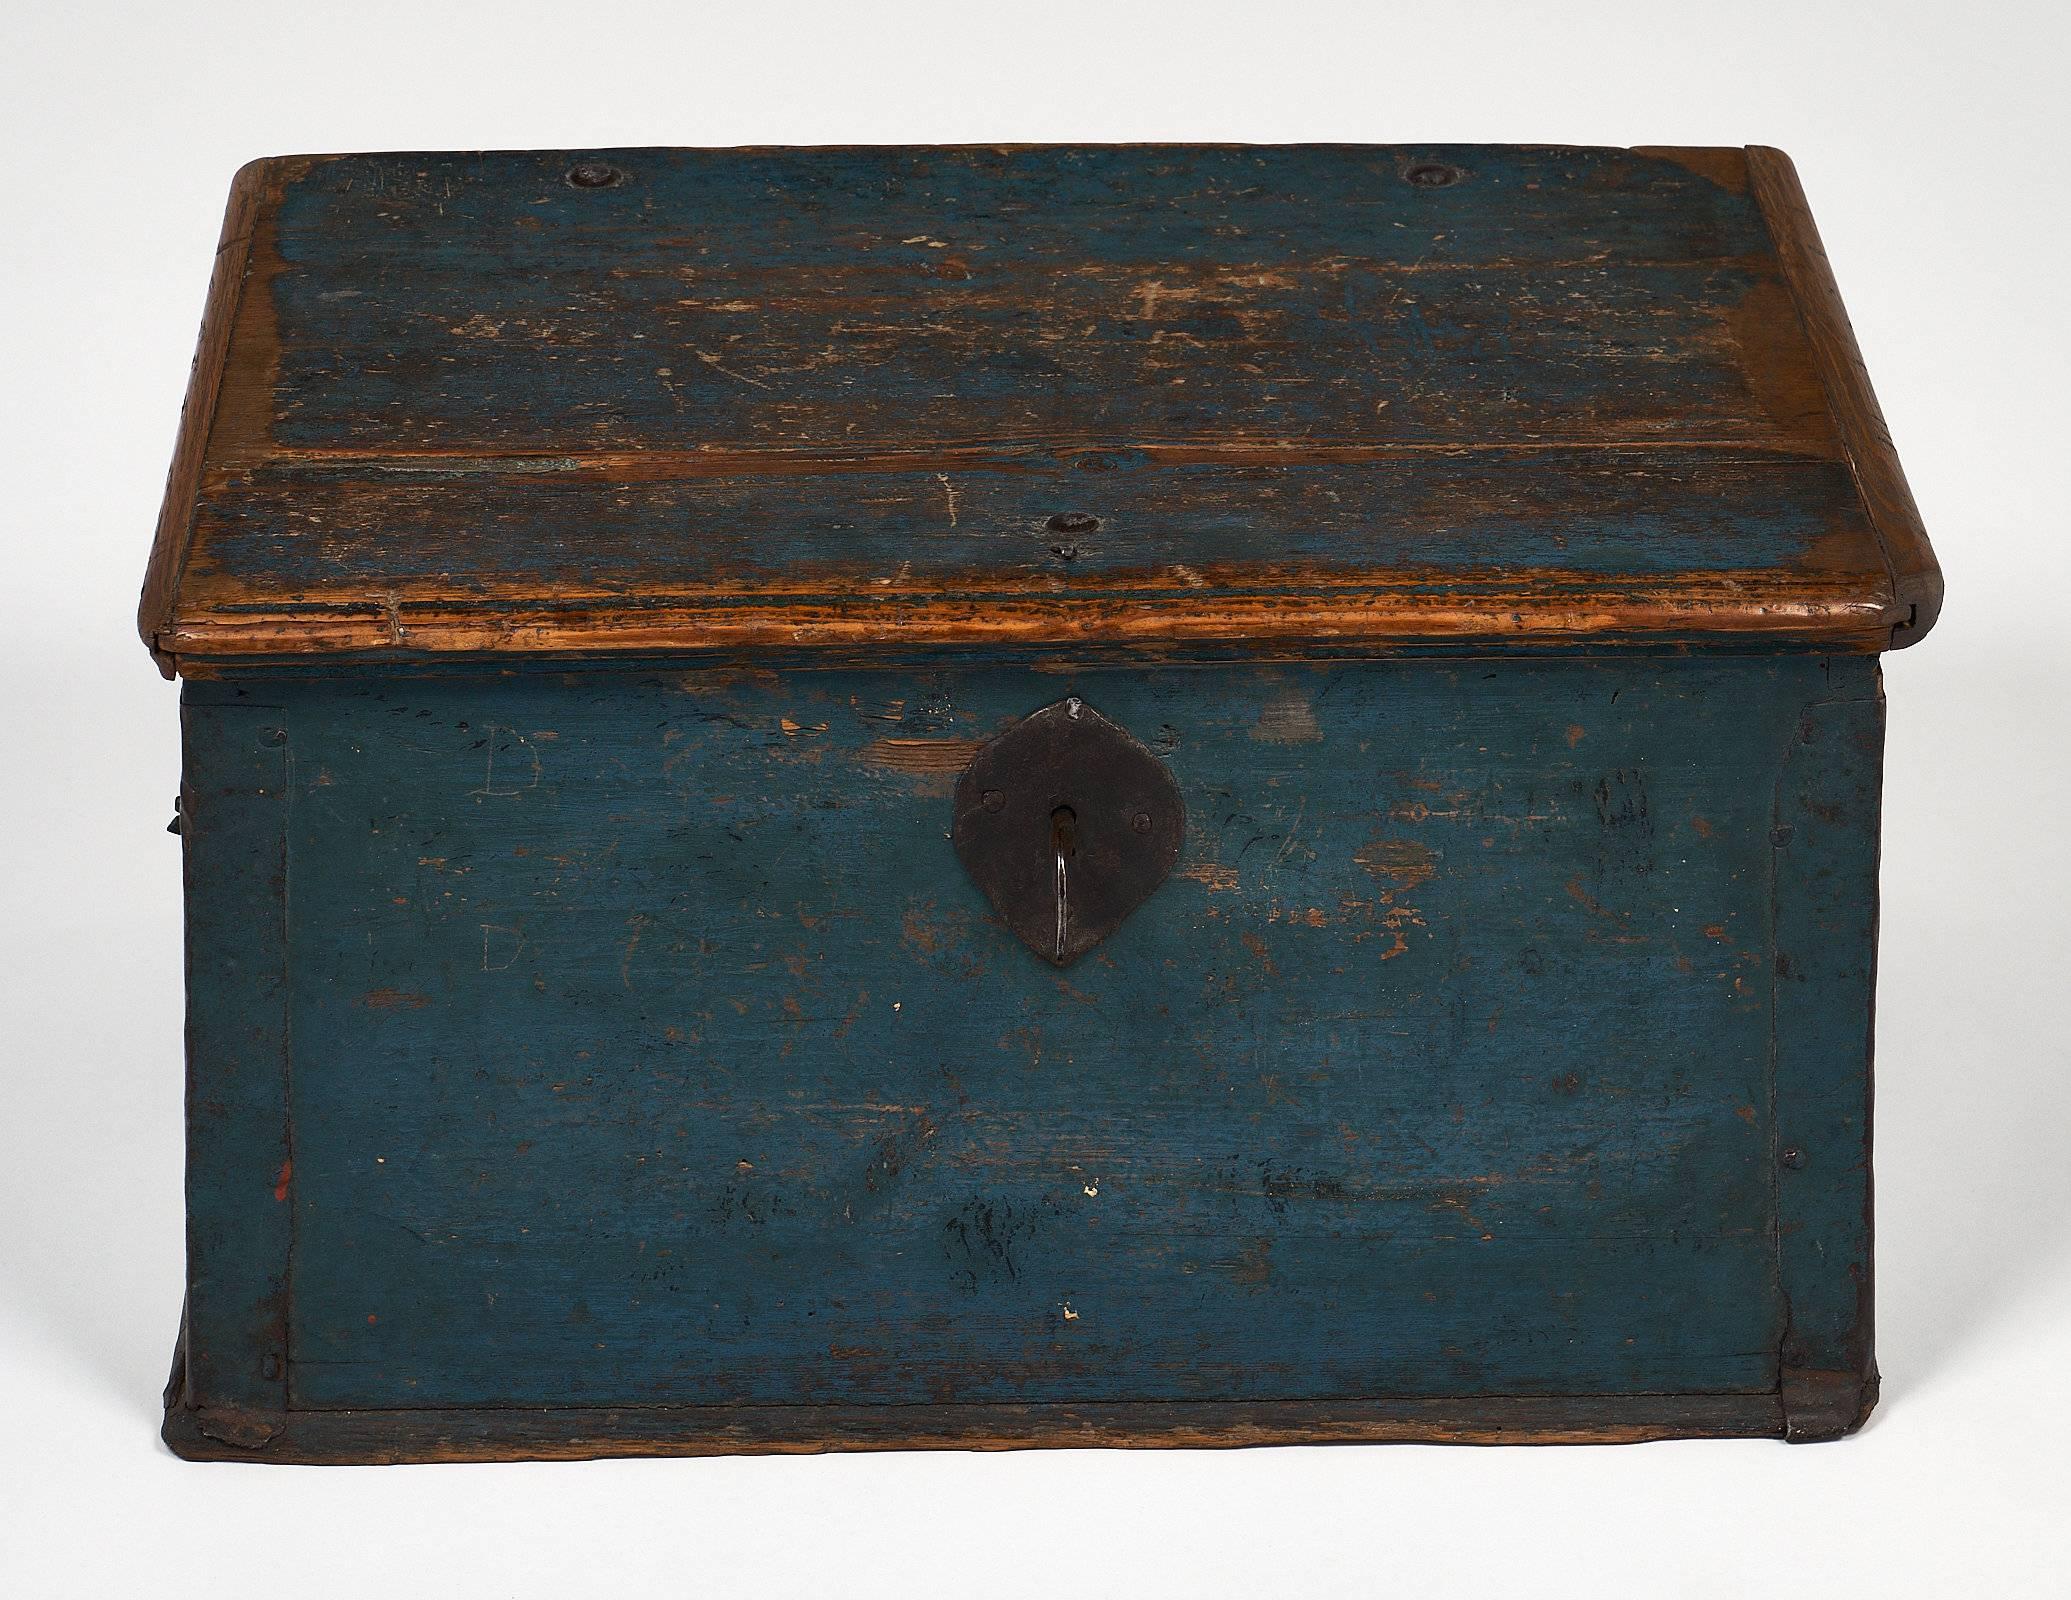 From Alba in the Piedmont region of Northern Italy, this antique writing box features its original lock and key, as well as two forged iron hinges, all hand-hammered. We loved the original color and condition of the piece and its irresistible “Wabi